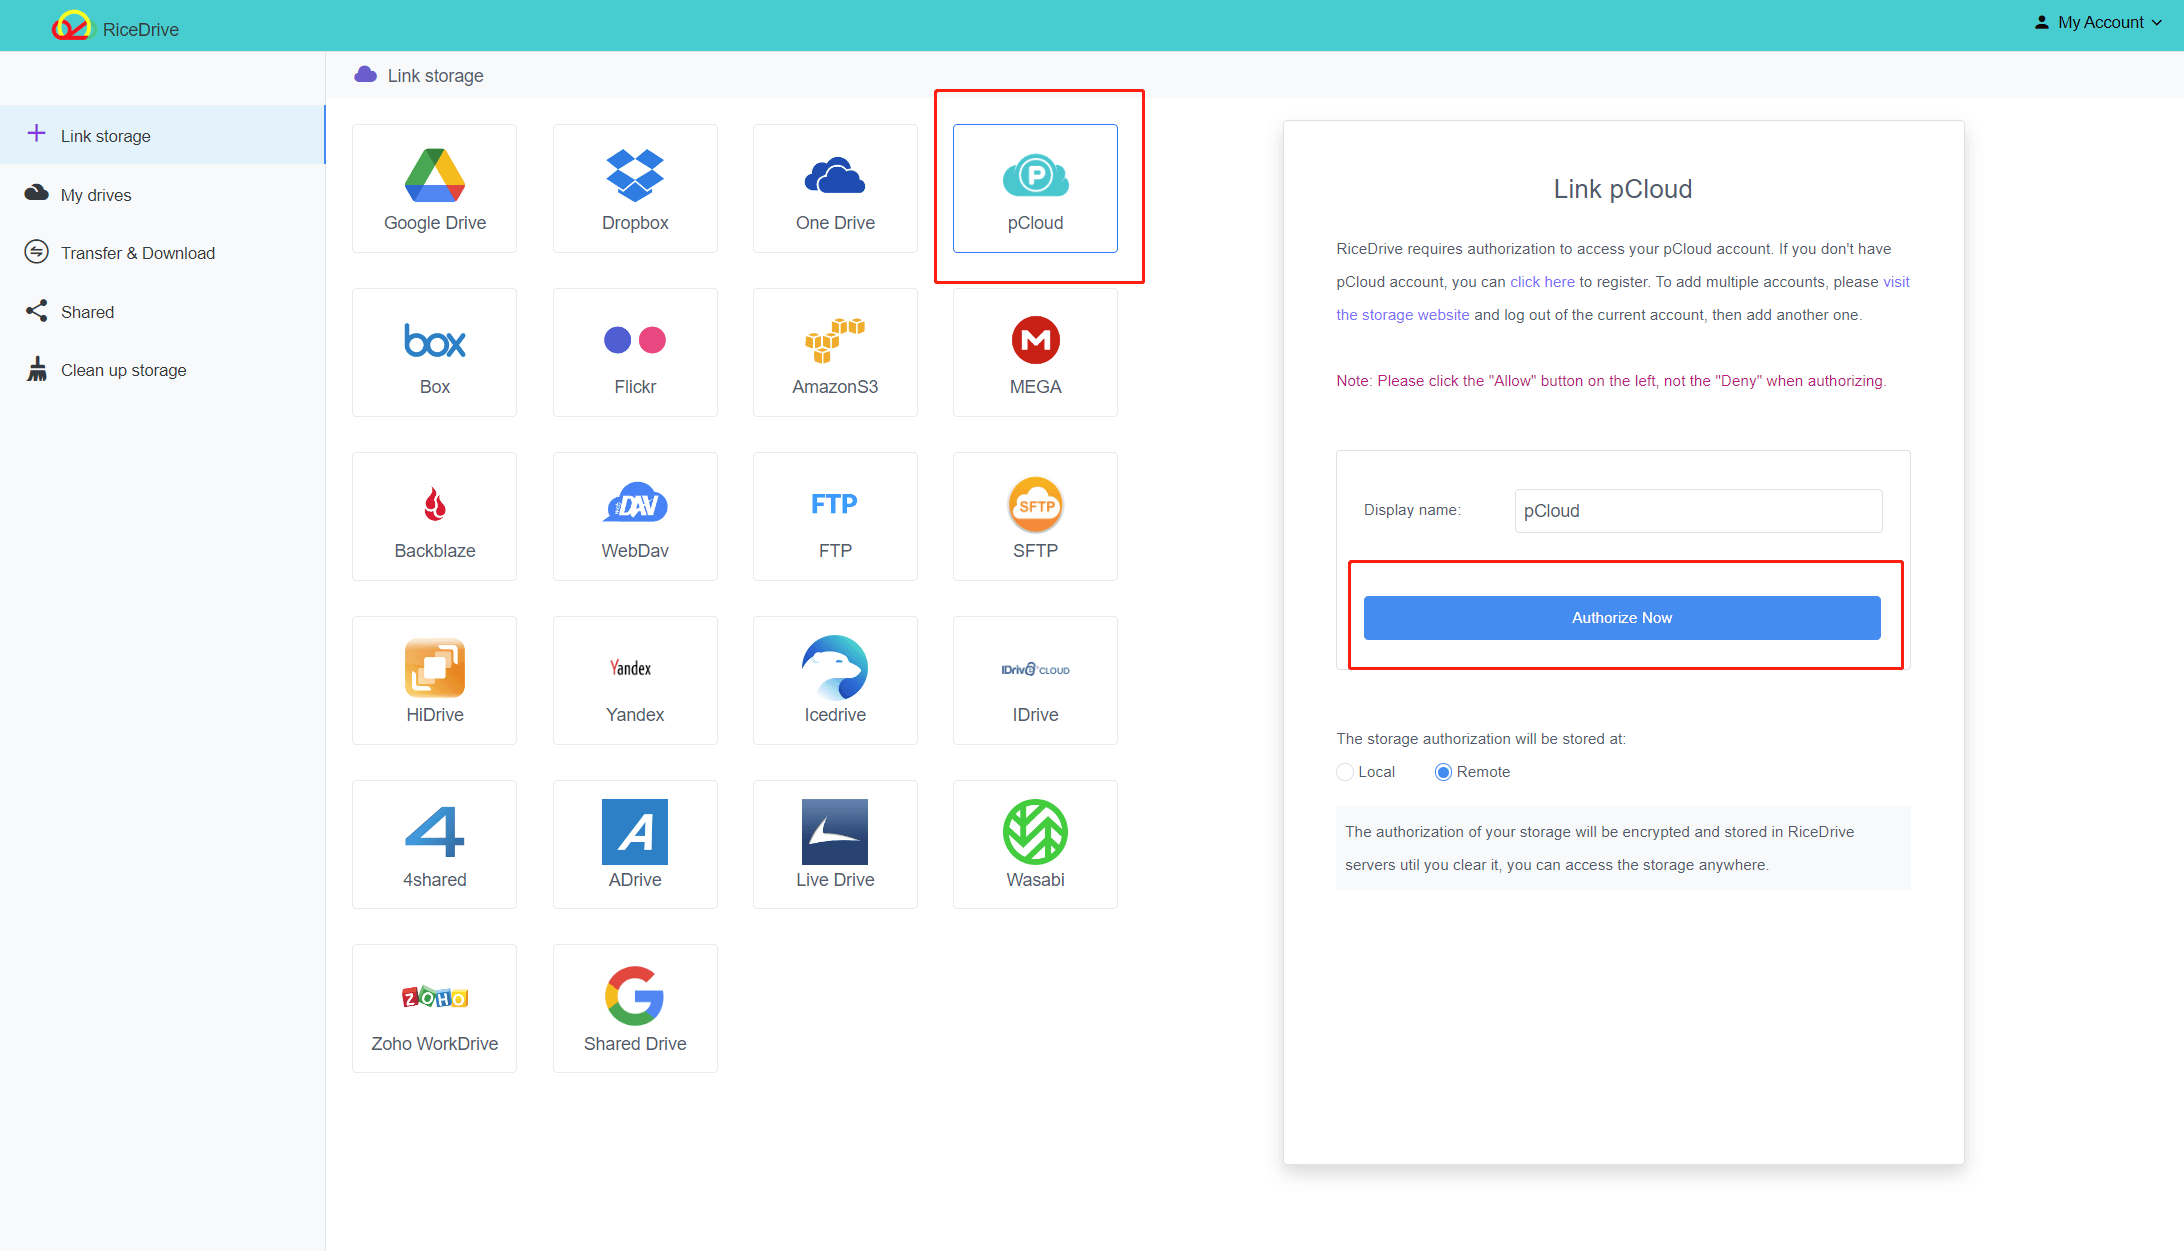 Connect Pcloud to RiceDrive